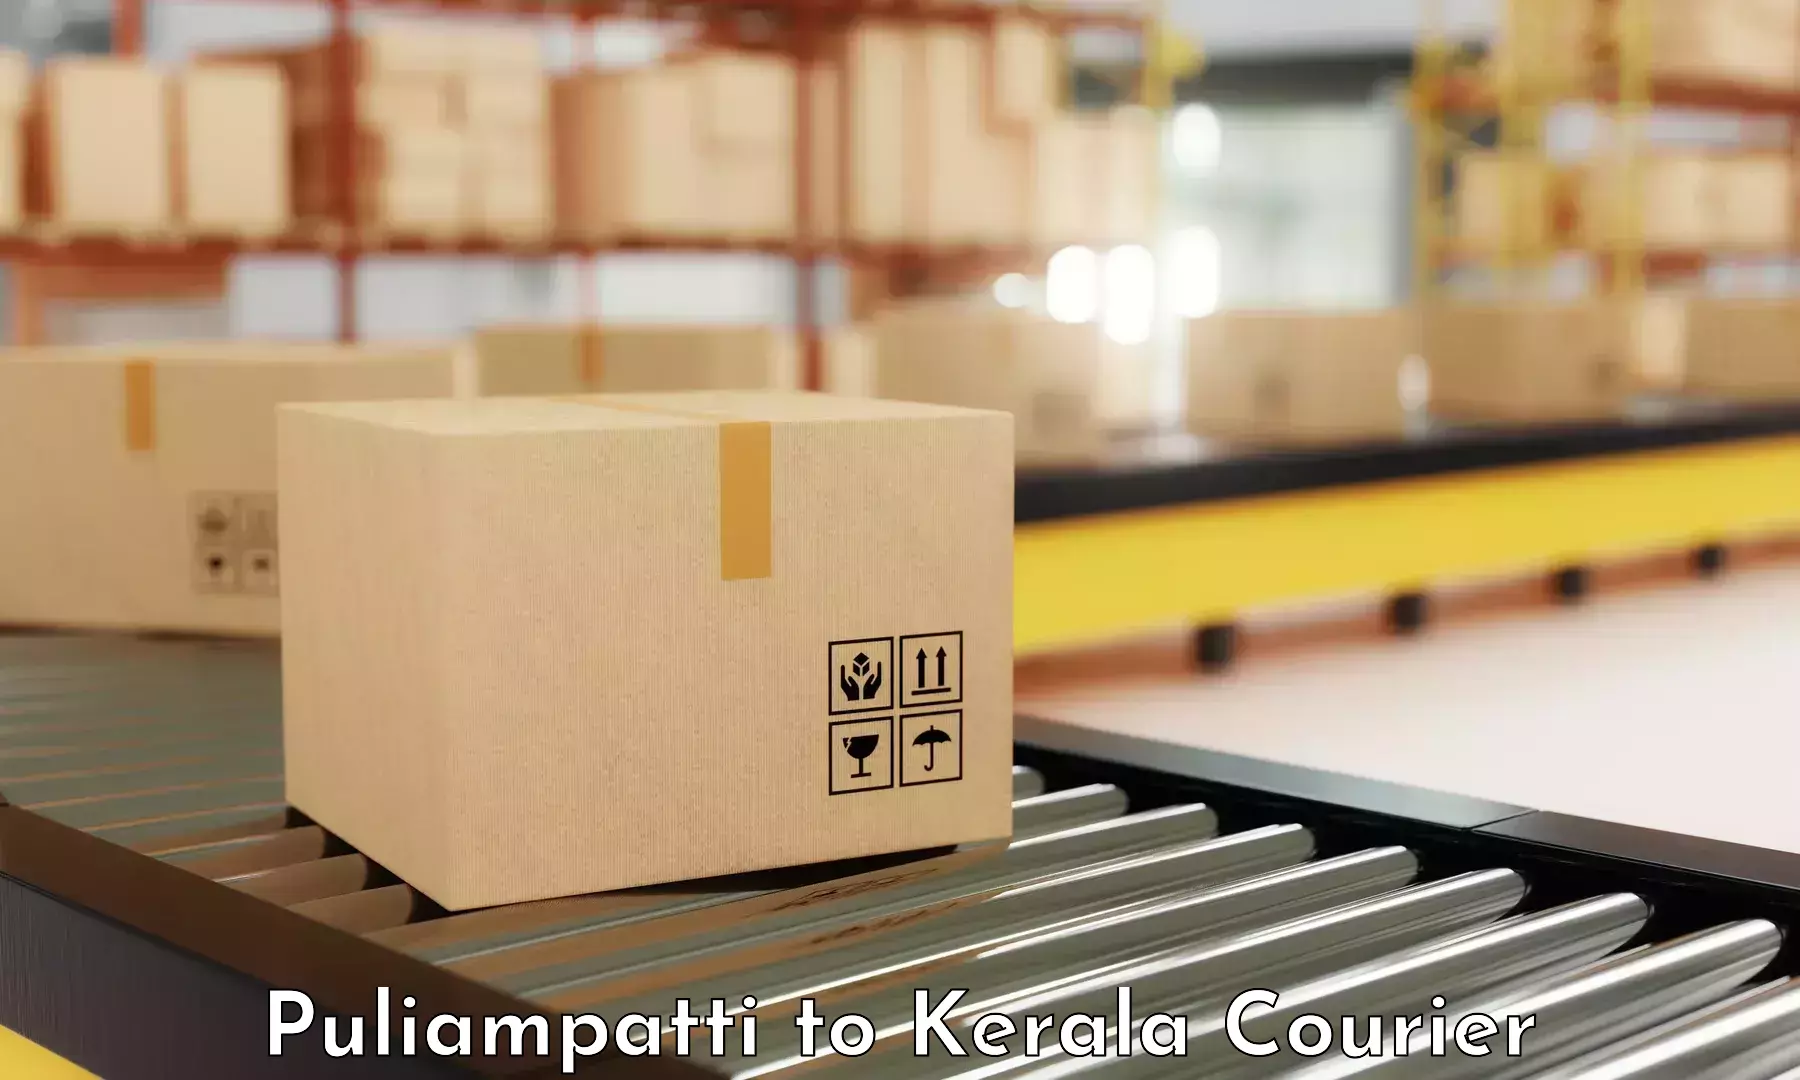 Streamlined delivery processes Puliampatti to Kakkur